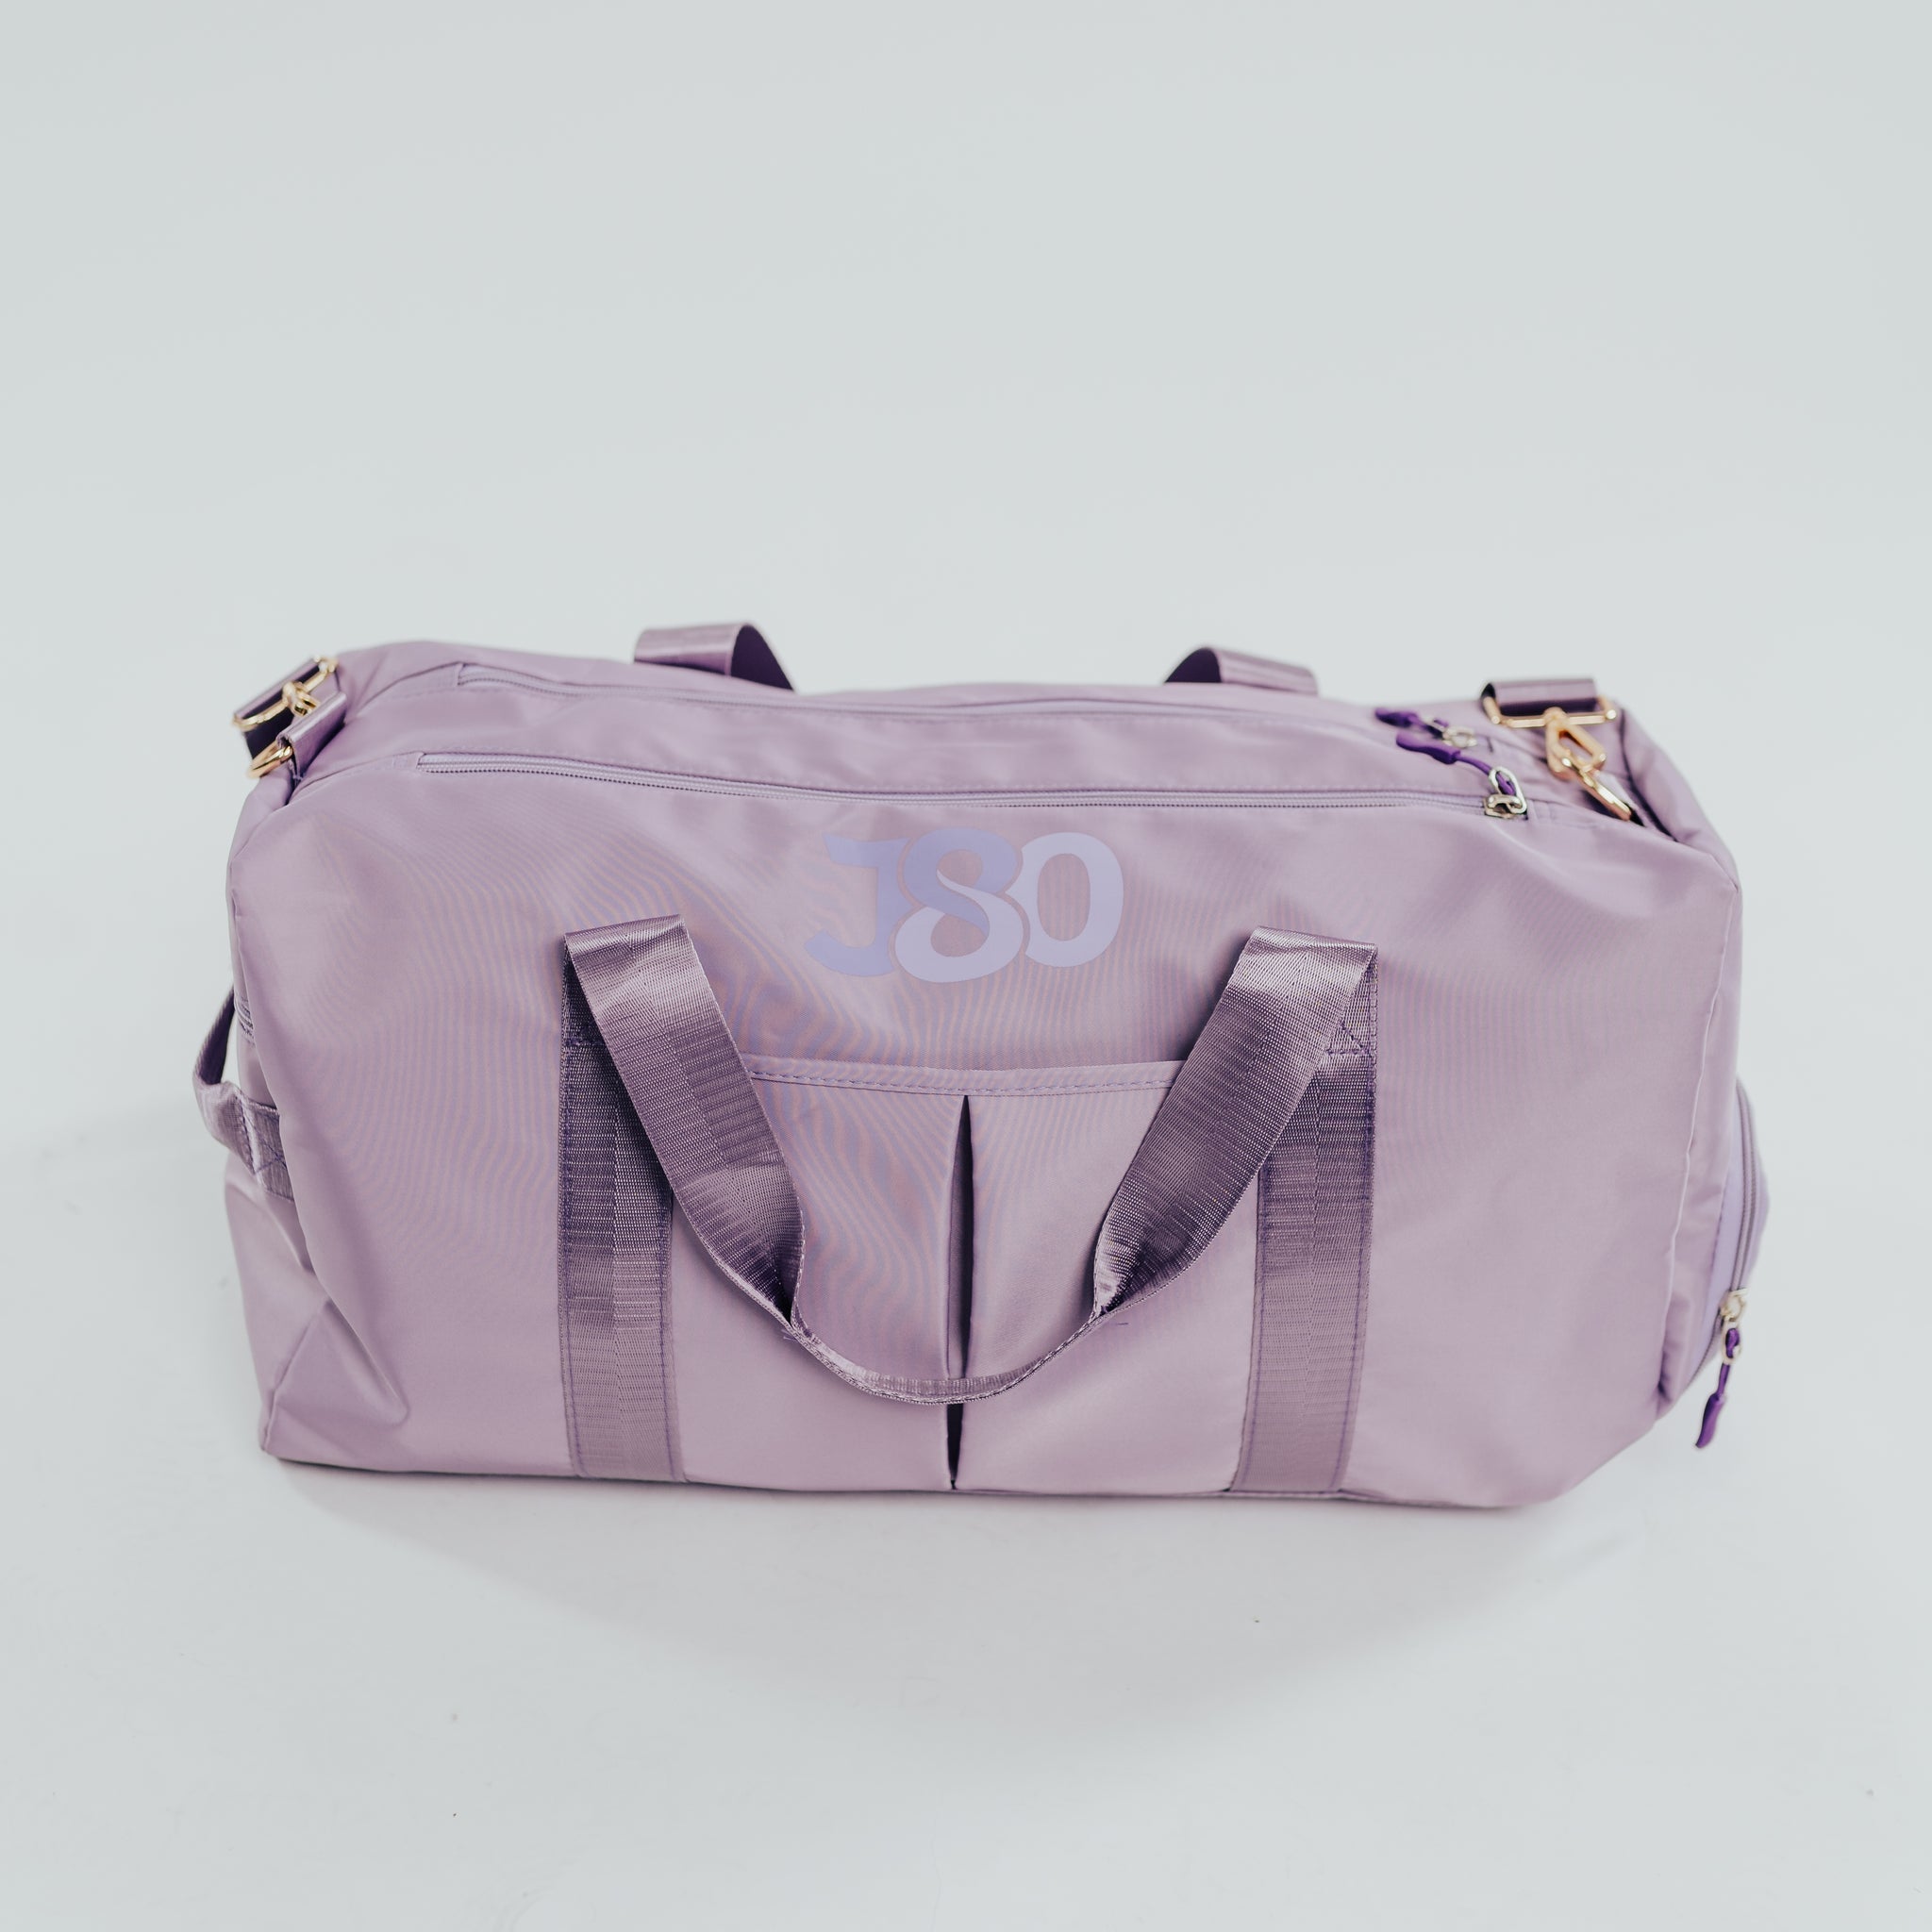 Level Up Duffle Bag, Best Gym Bags